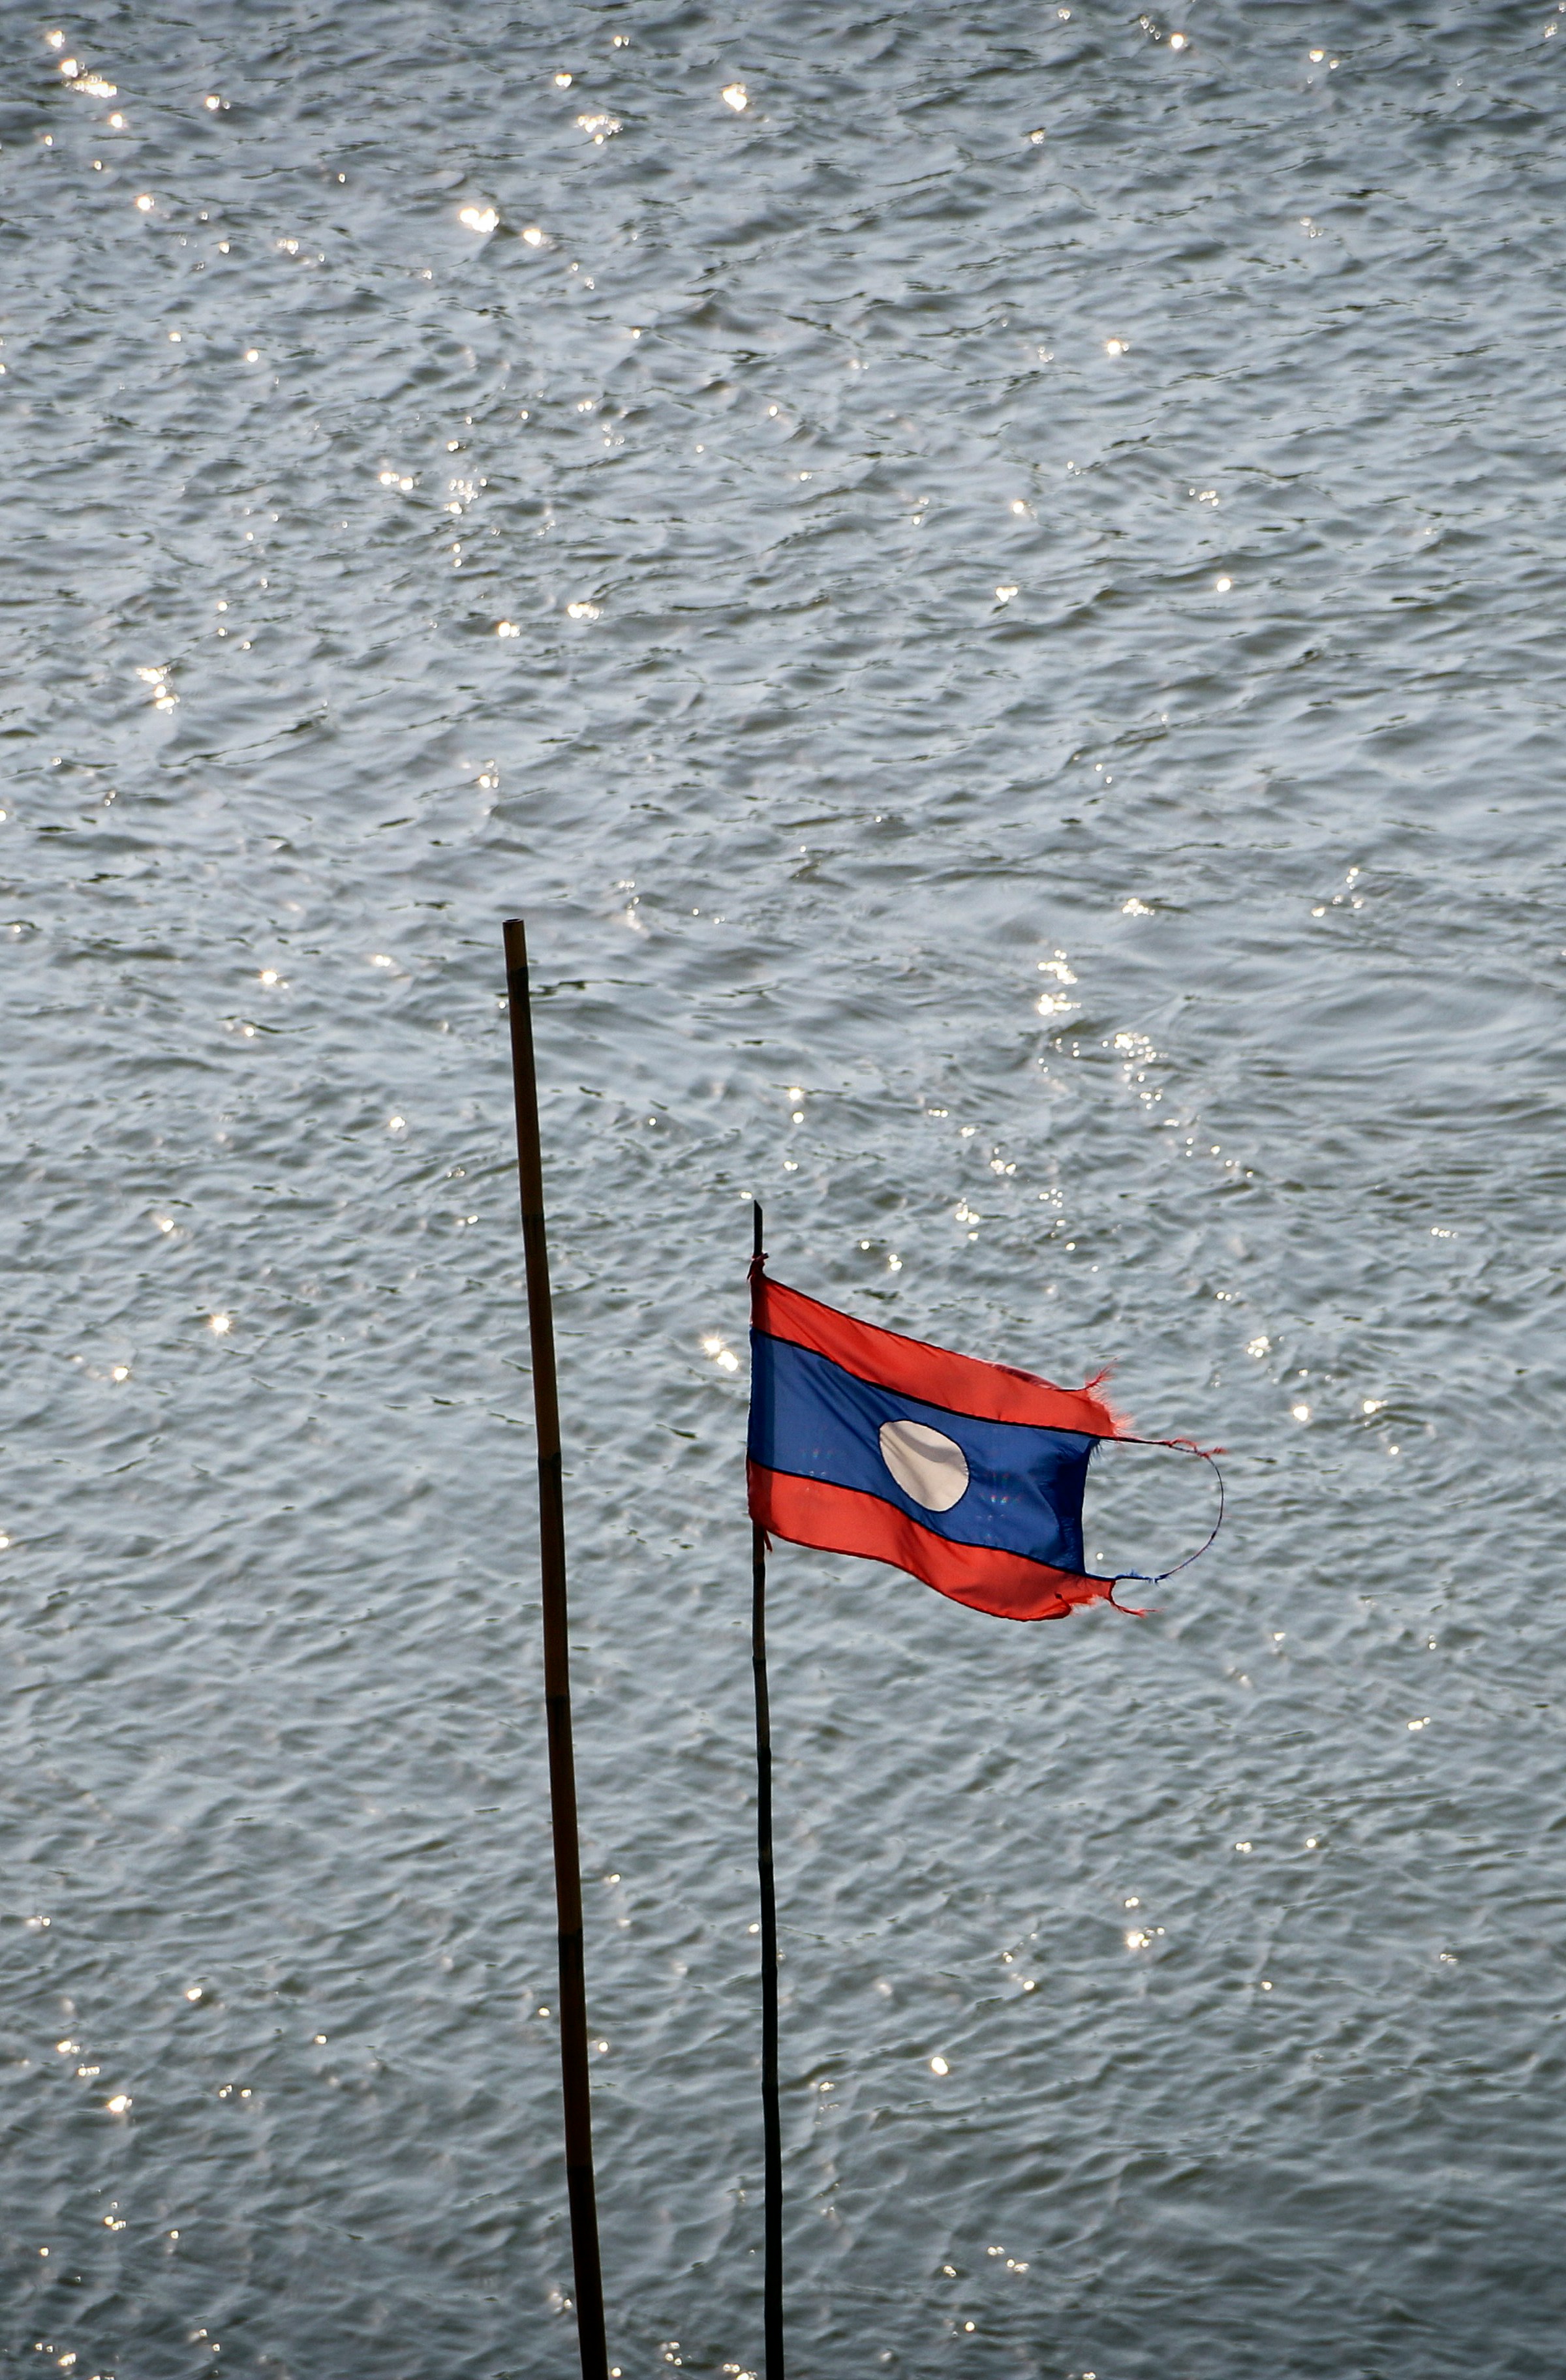 blue and red flag on pole on body of water